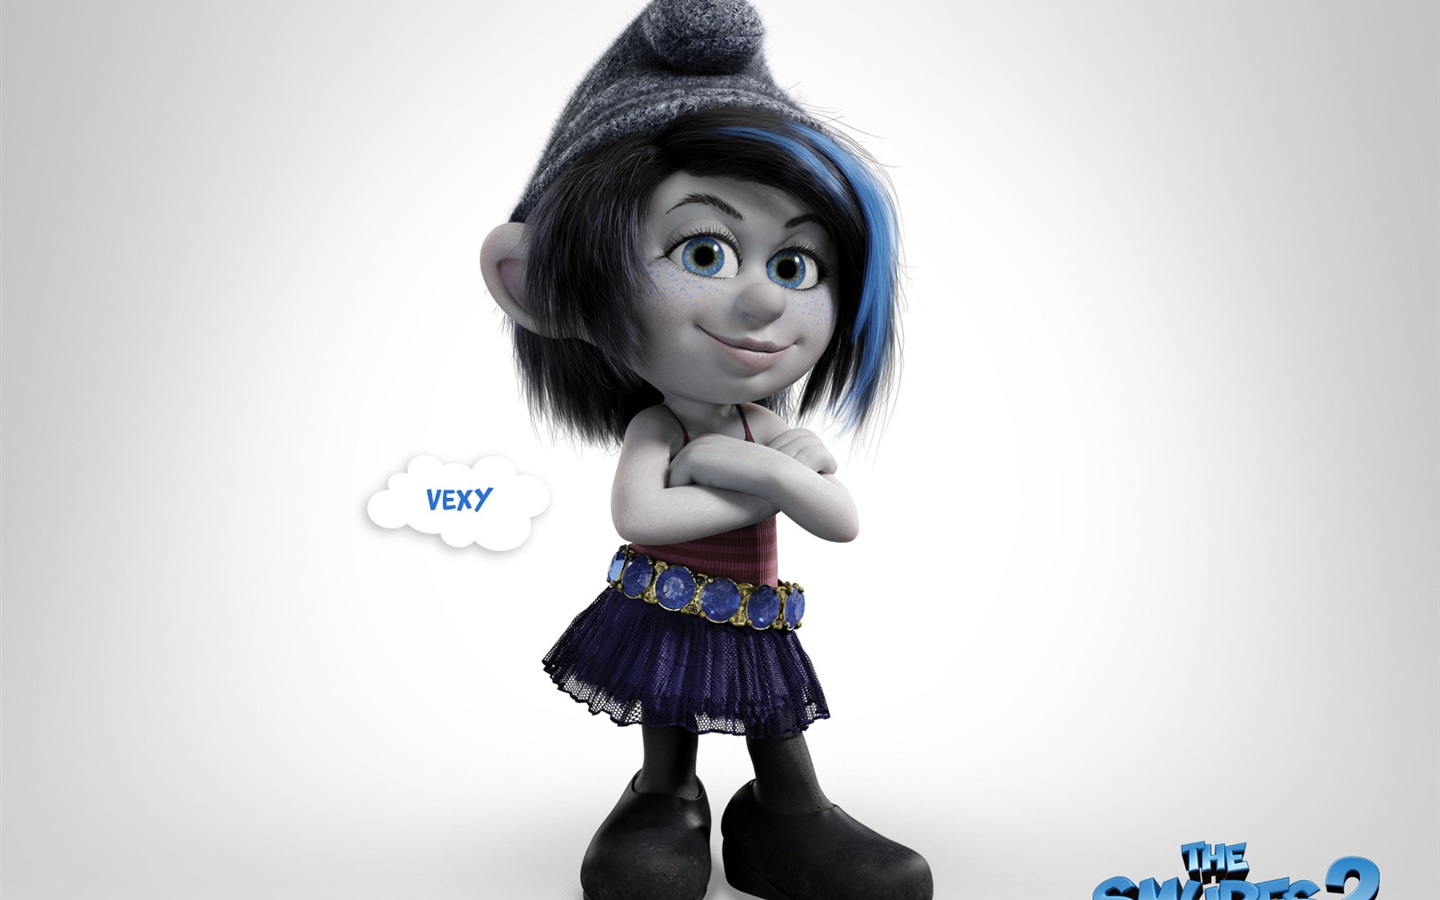 The Smurfs 2 HD movie wallpapers #11 - 1440x900